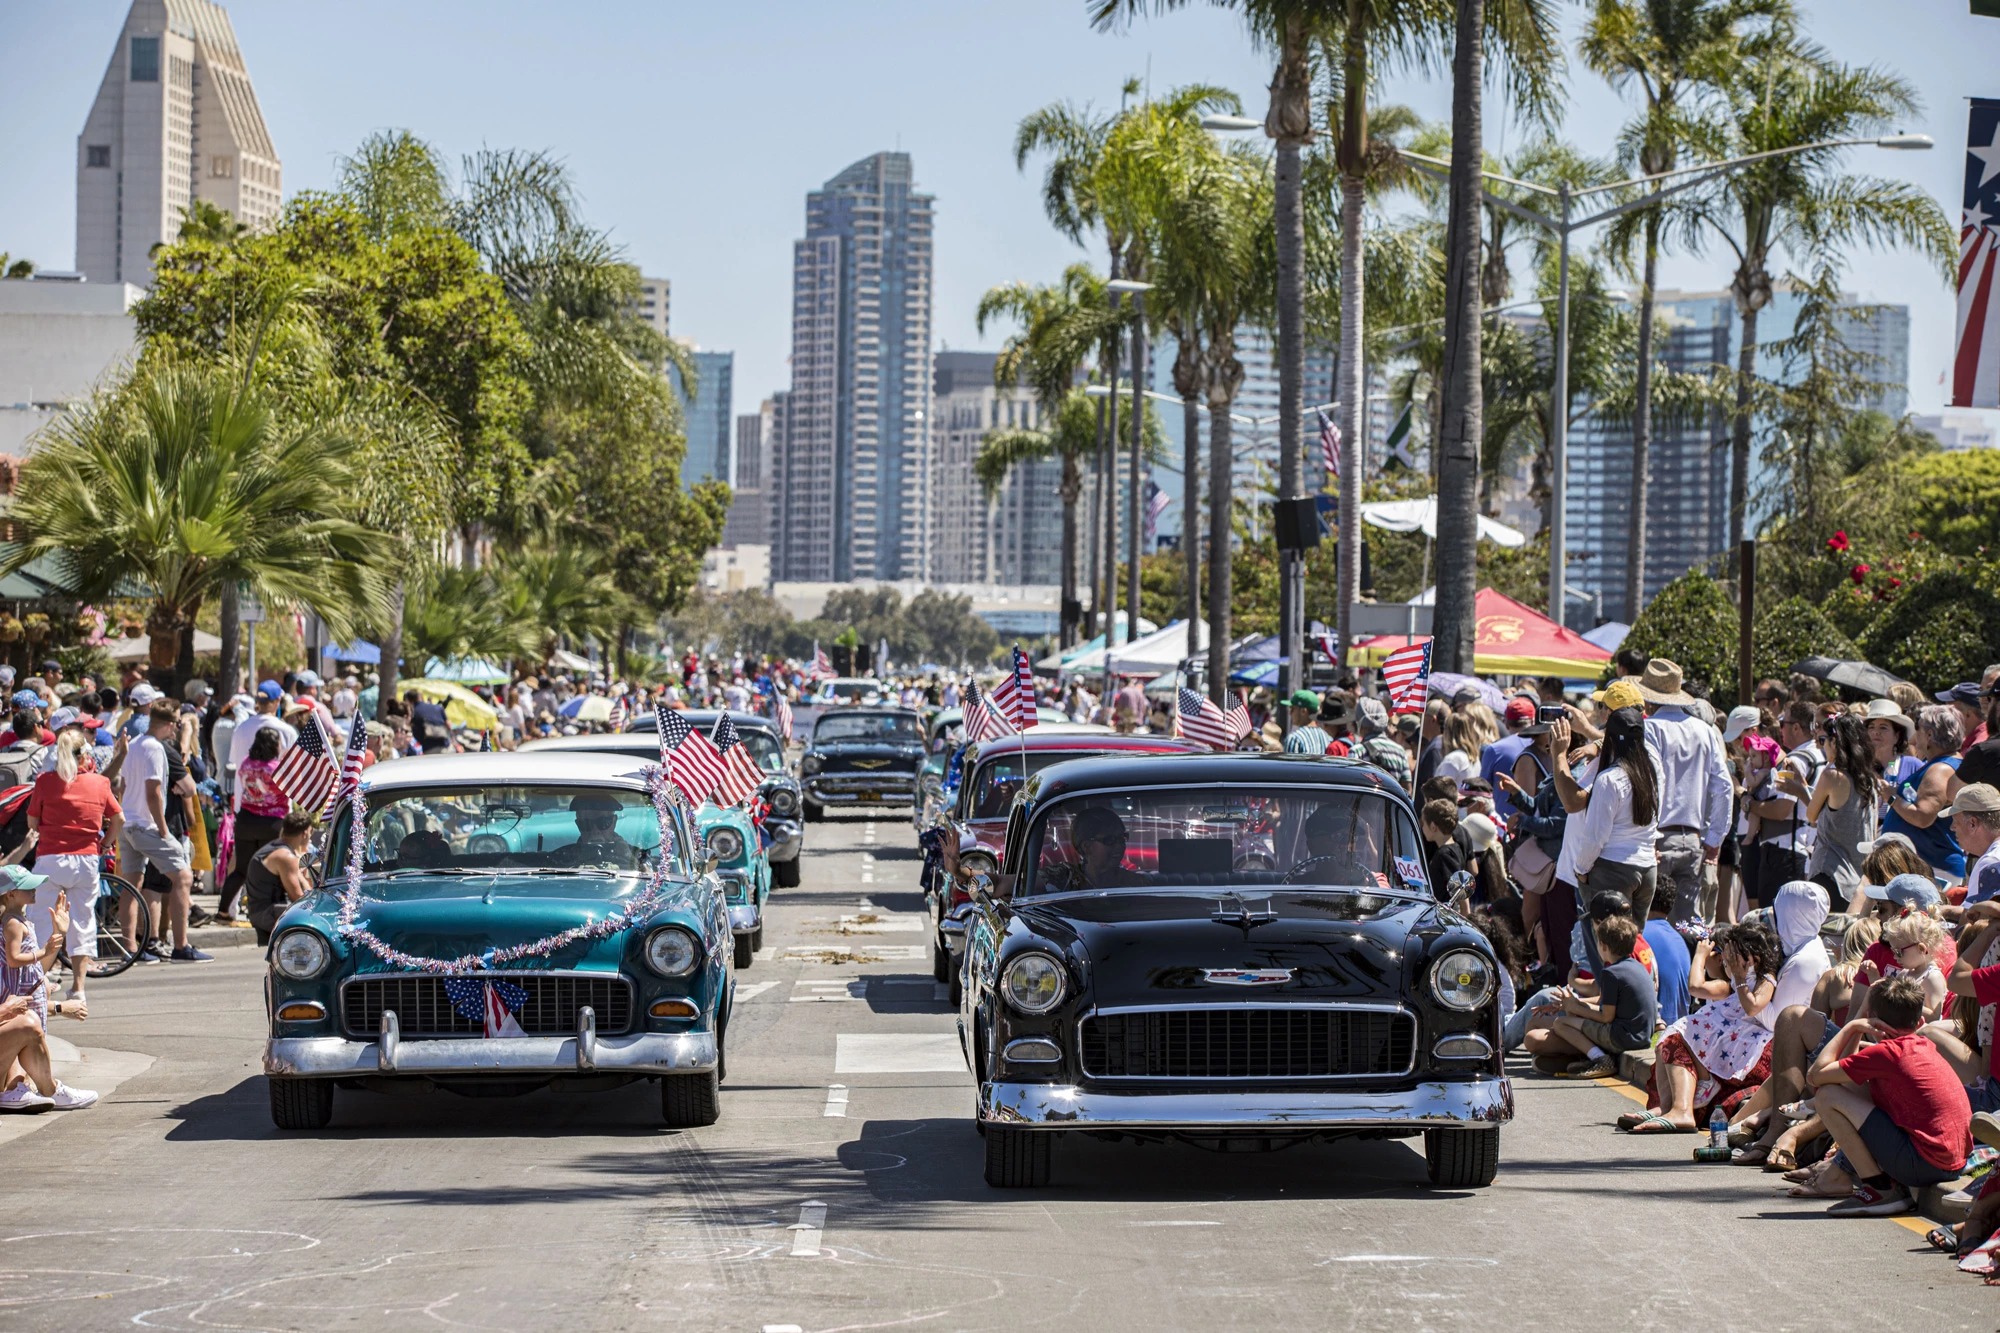 CORONADO, CALIFORNIA - JULY 04: General view of the atmosphere at the 73rd Anniversary 4th of July Parade on July 04, 2022 in Coronado, California. (Photo by Daniel Knighton/Getty Images)